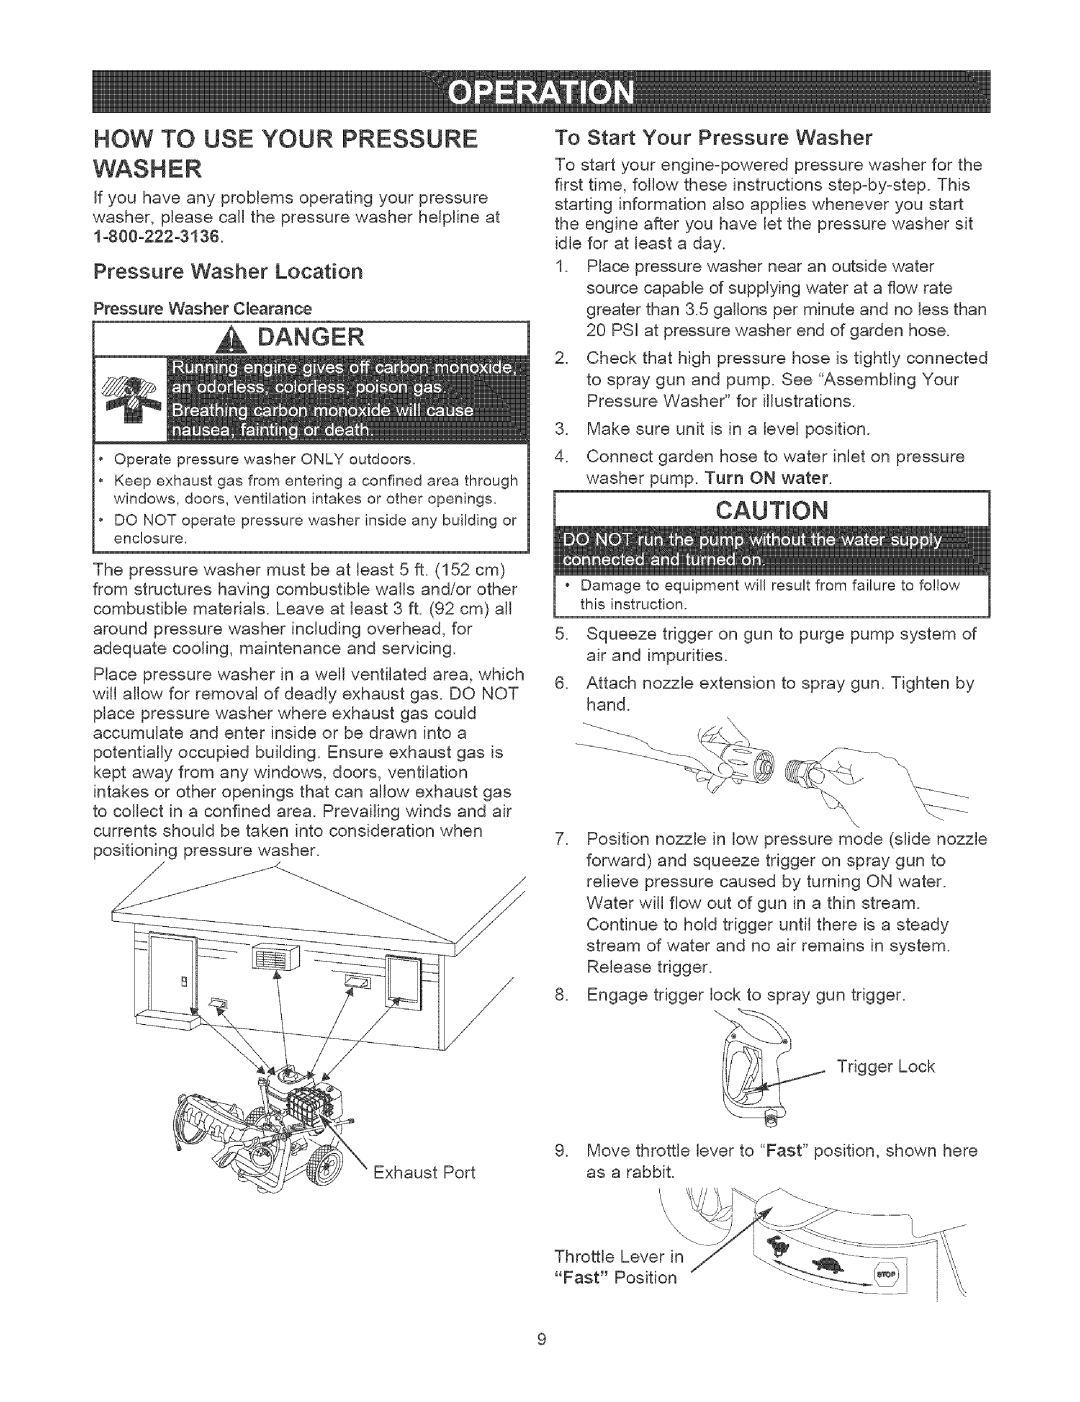 Craftsman 580.7524 owner manual How To Use Your Pressure Washer, Danger, CAUTtON, Pressure Washer Location 